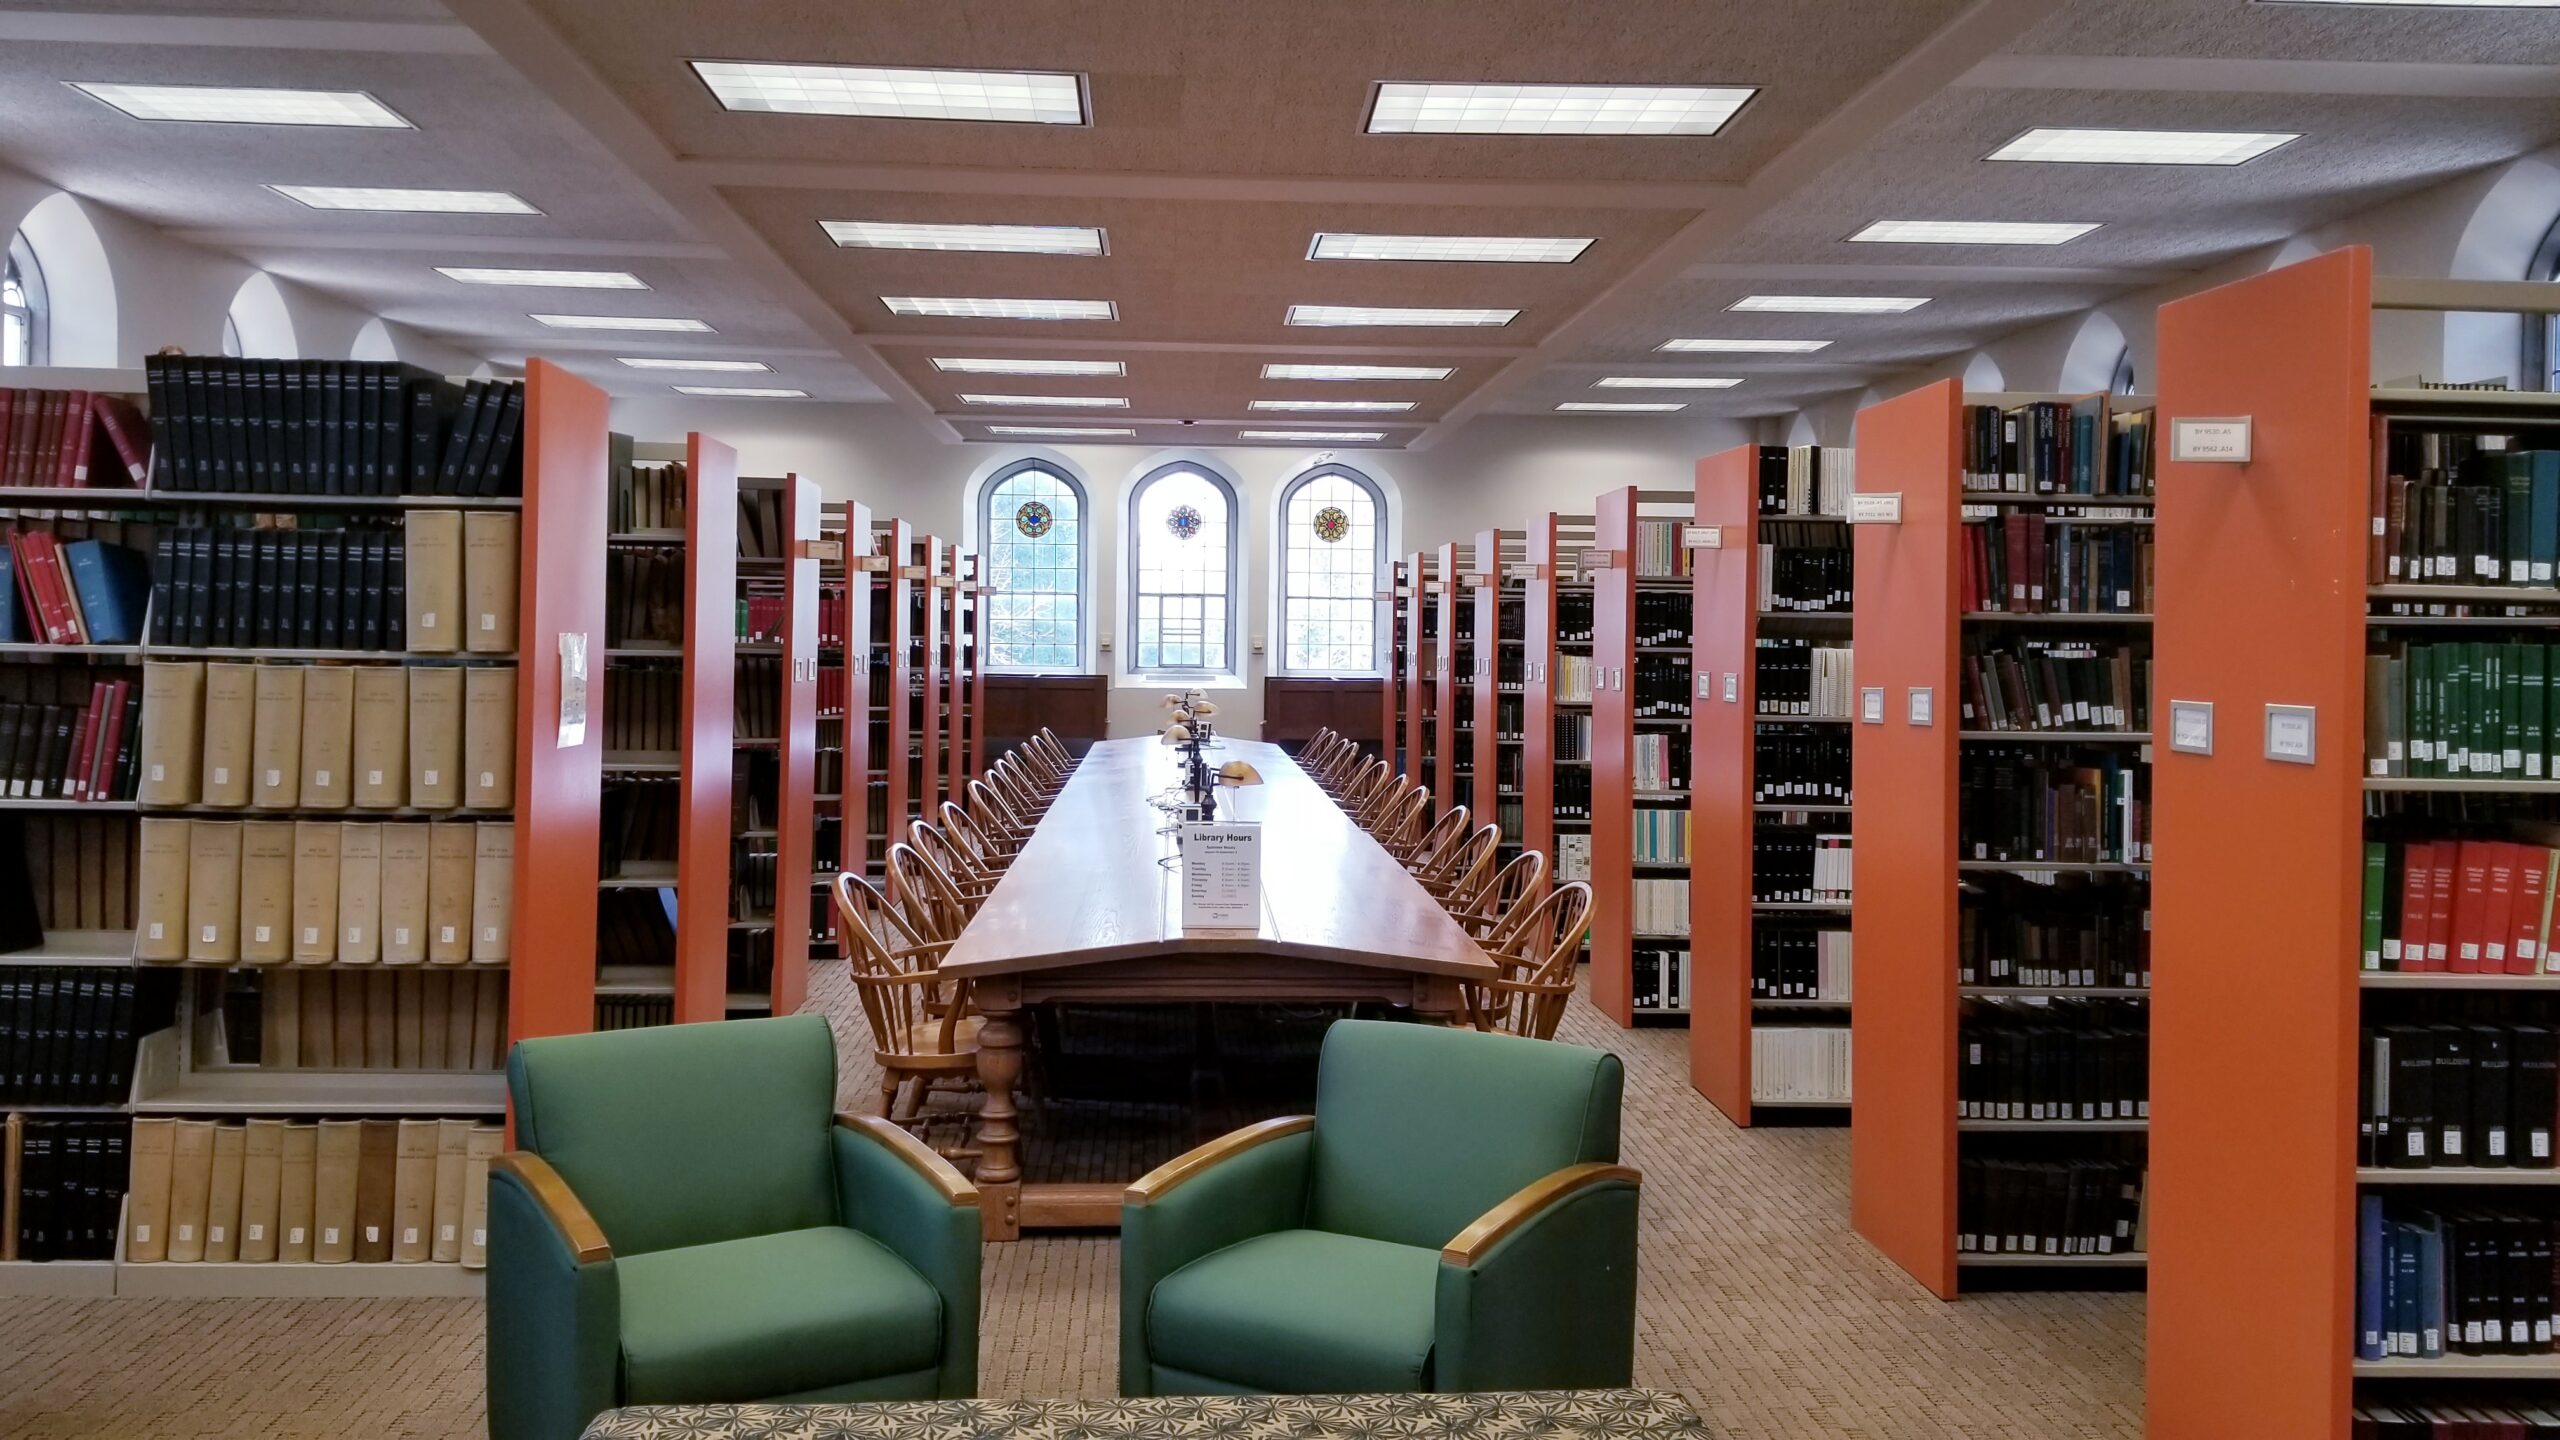 Photo of the Methodist reading room in Styberg Library